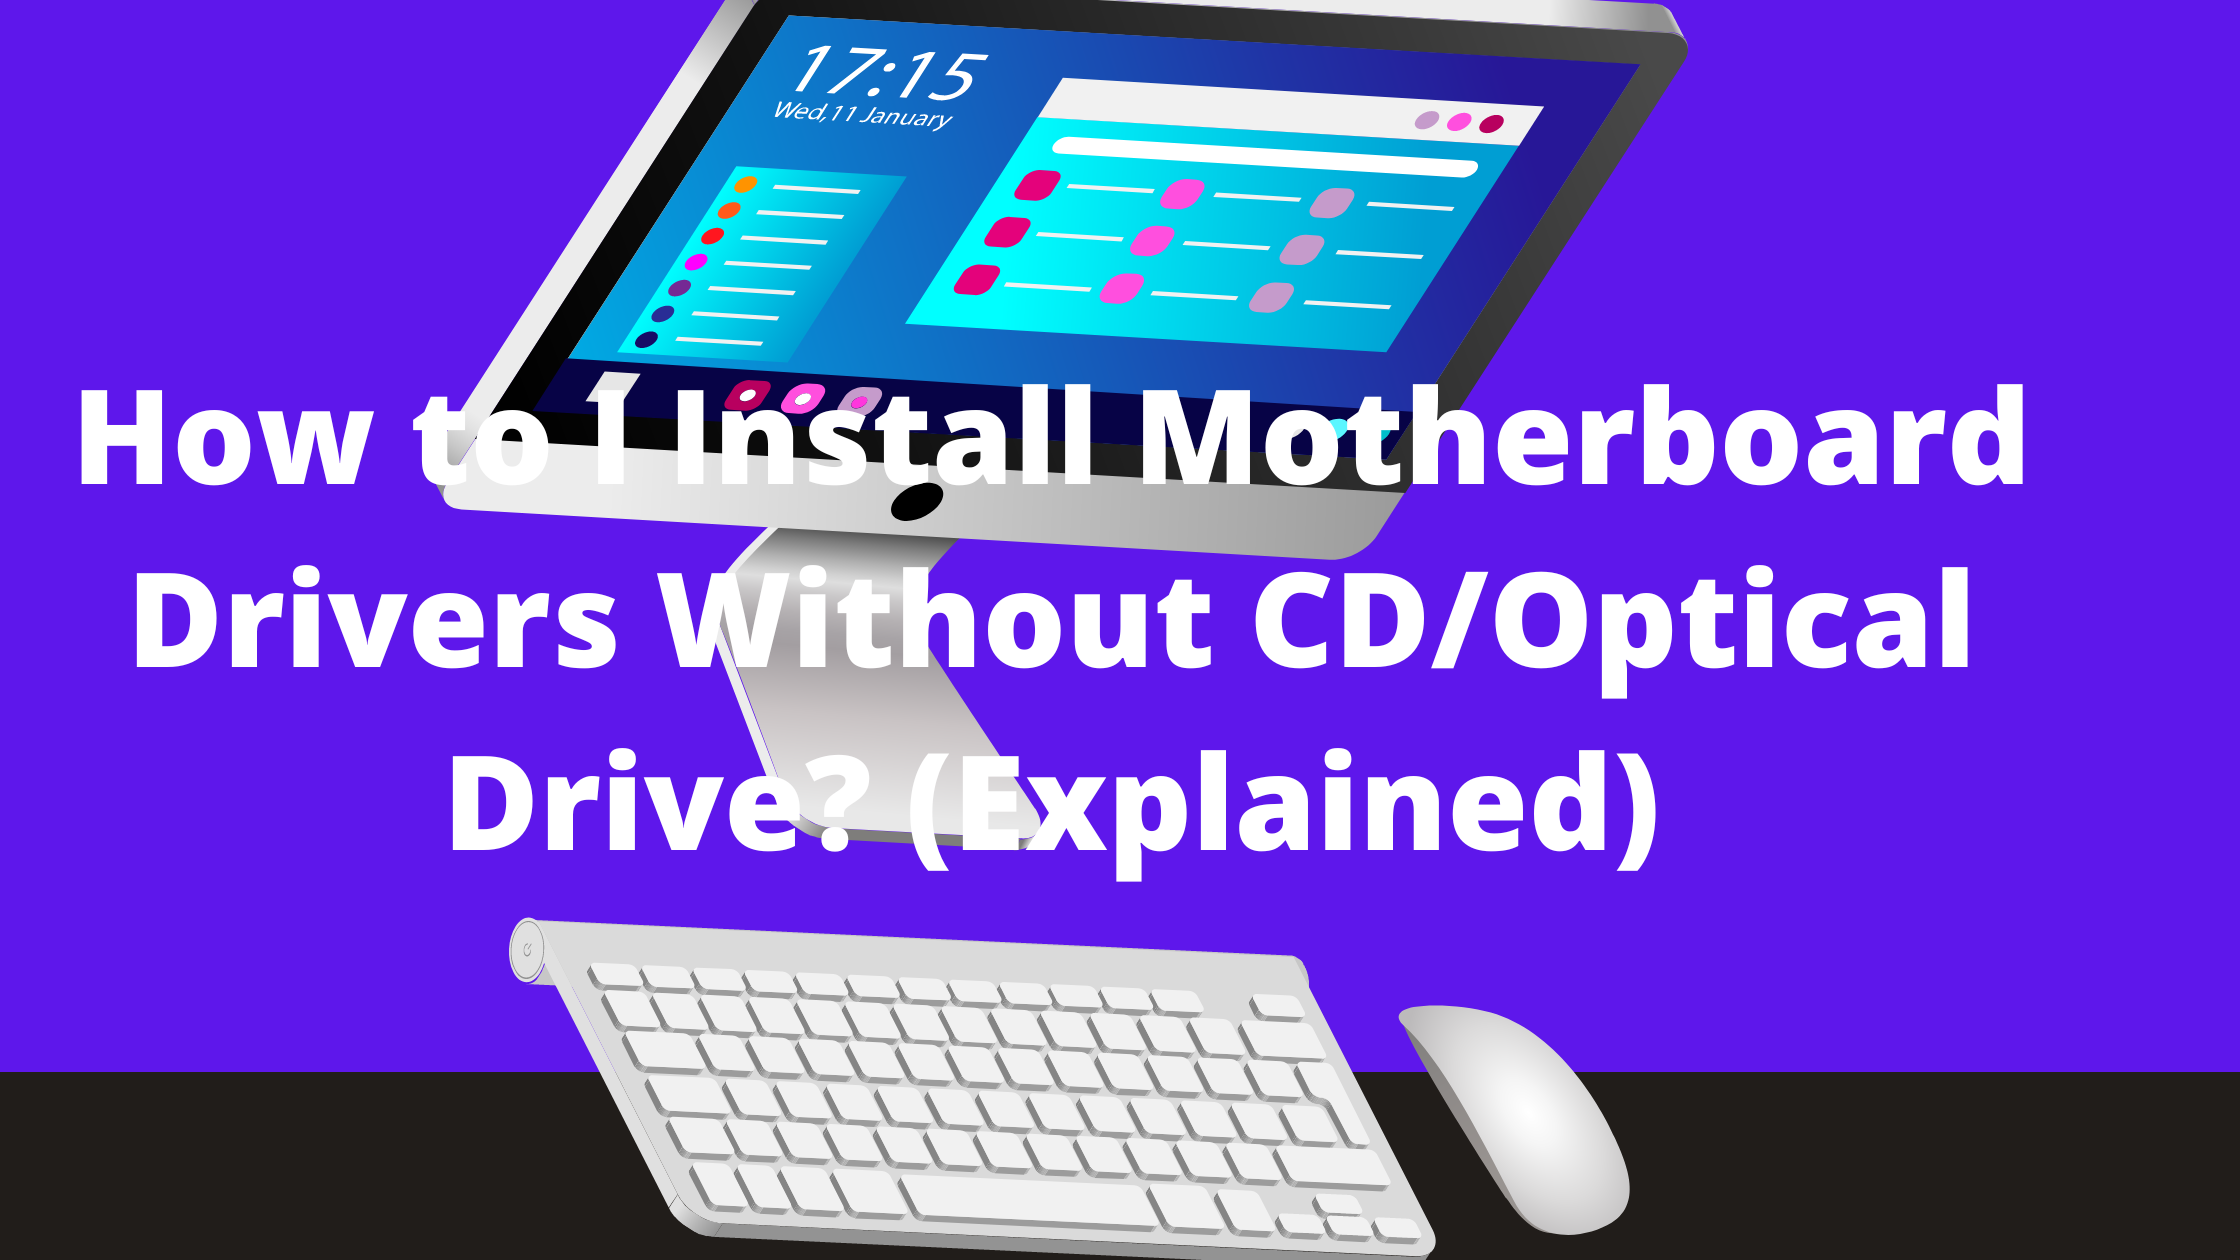 How to I Install Motherboard Drivers Without CD/Optical Drive? (Explained)